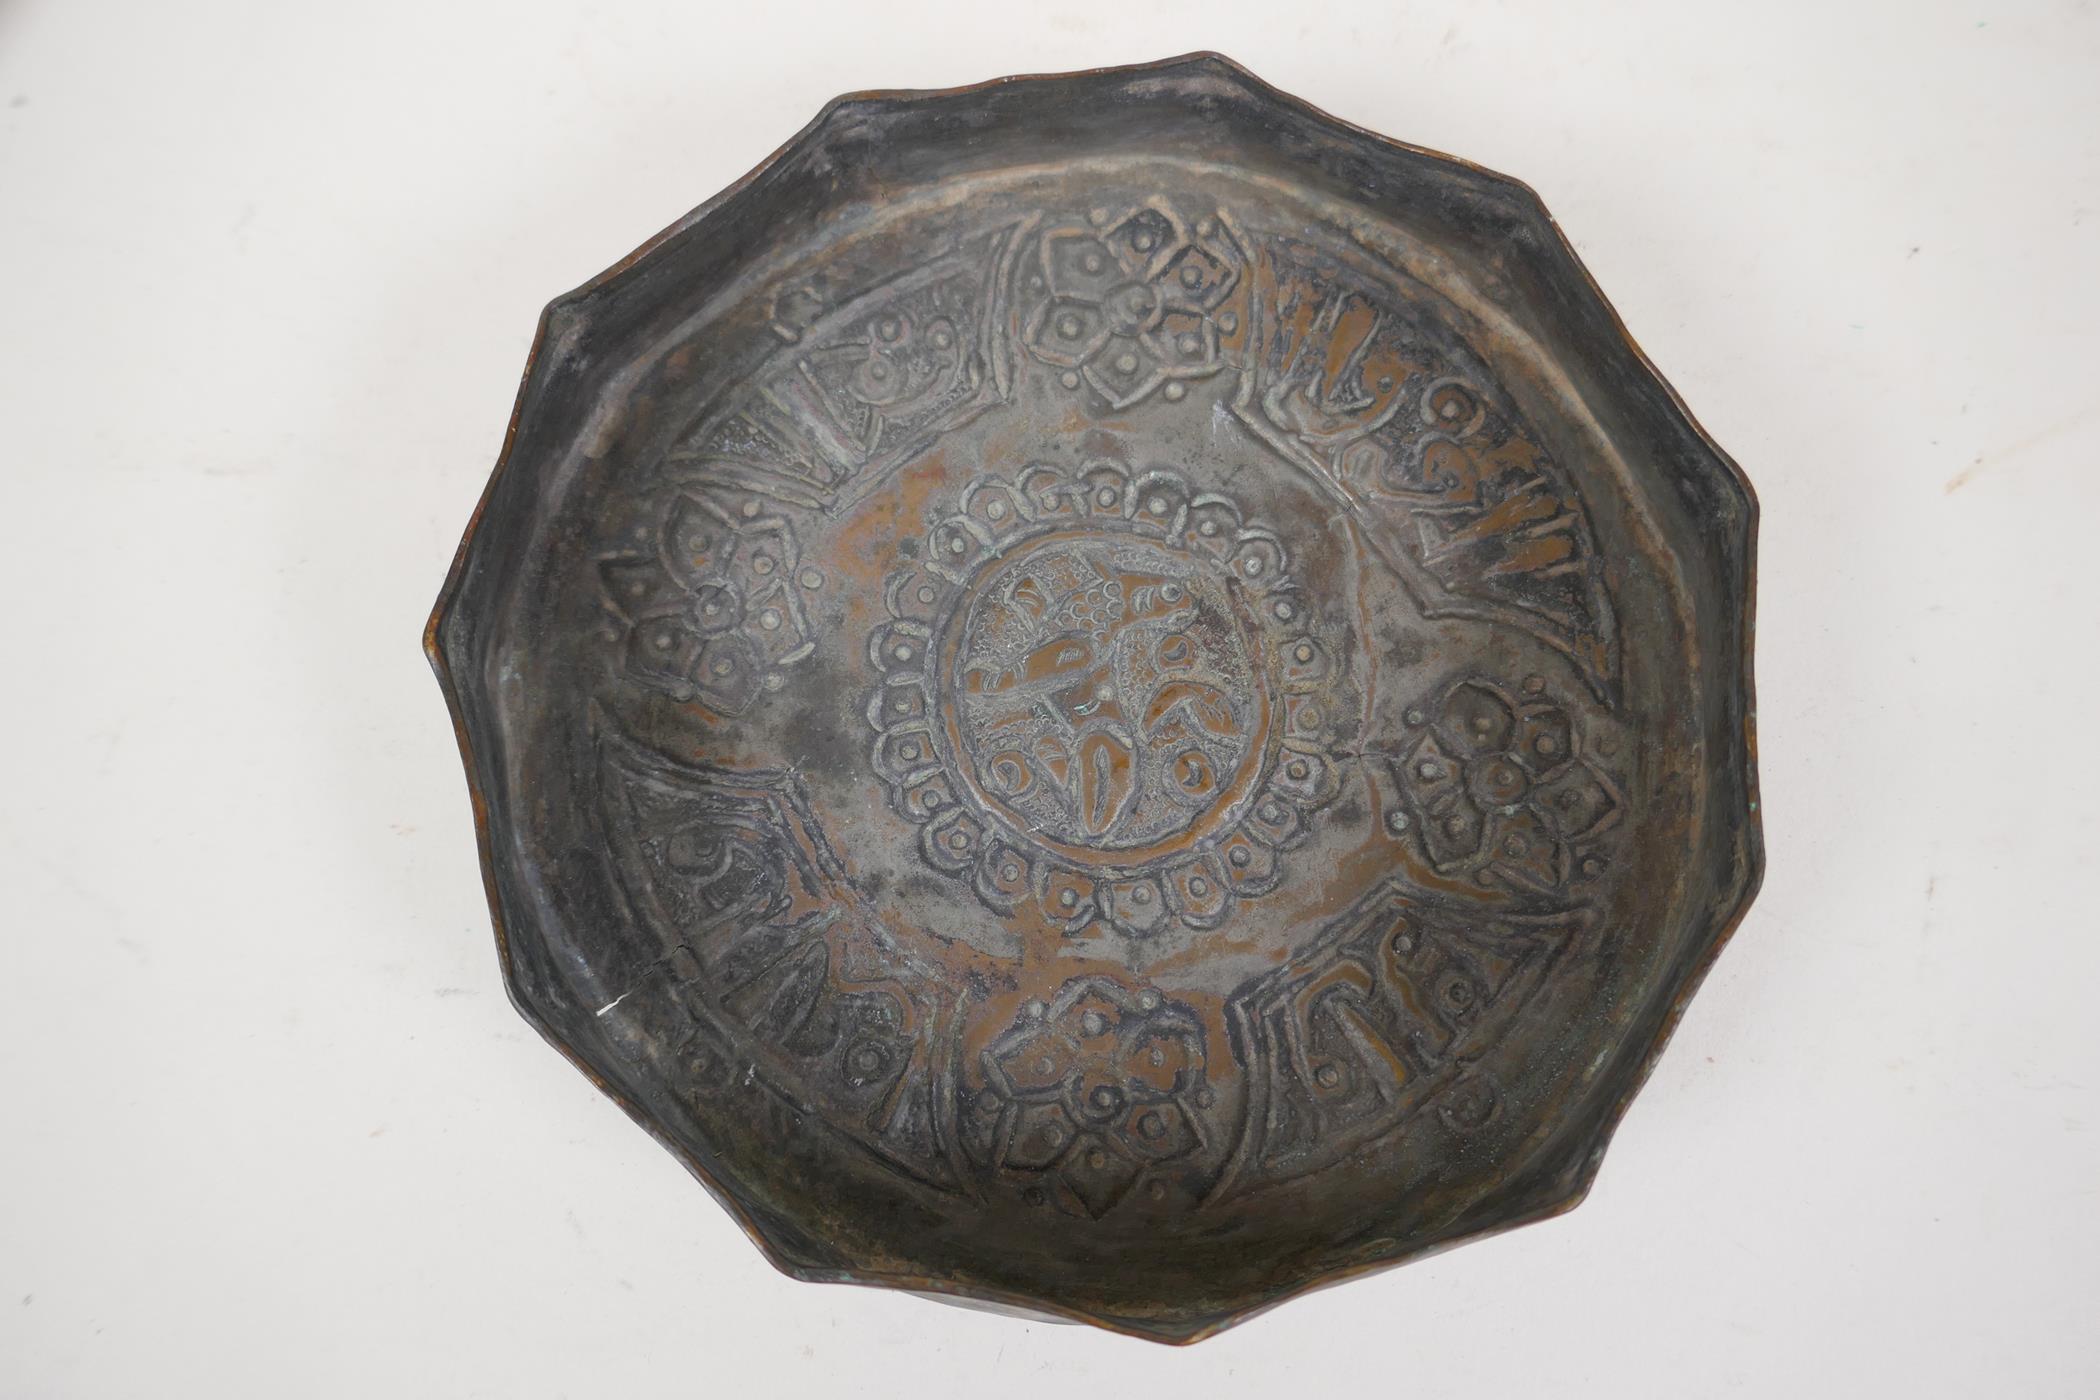 A Persian metal shallow bowl with repousse embossed decoration, 6" diameter - Image 2 of 4